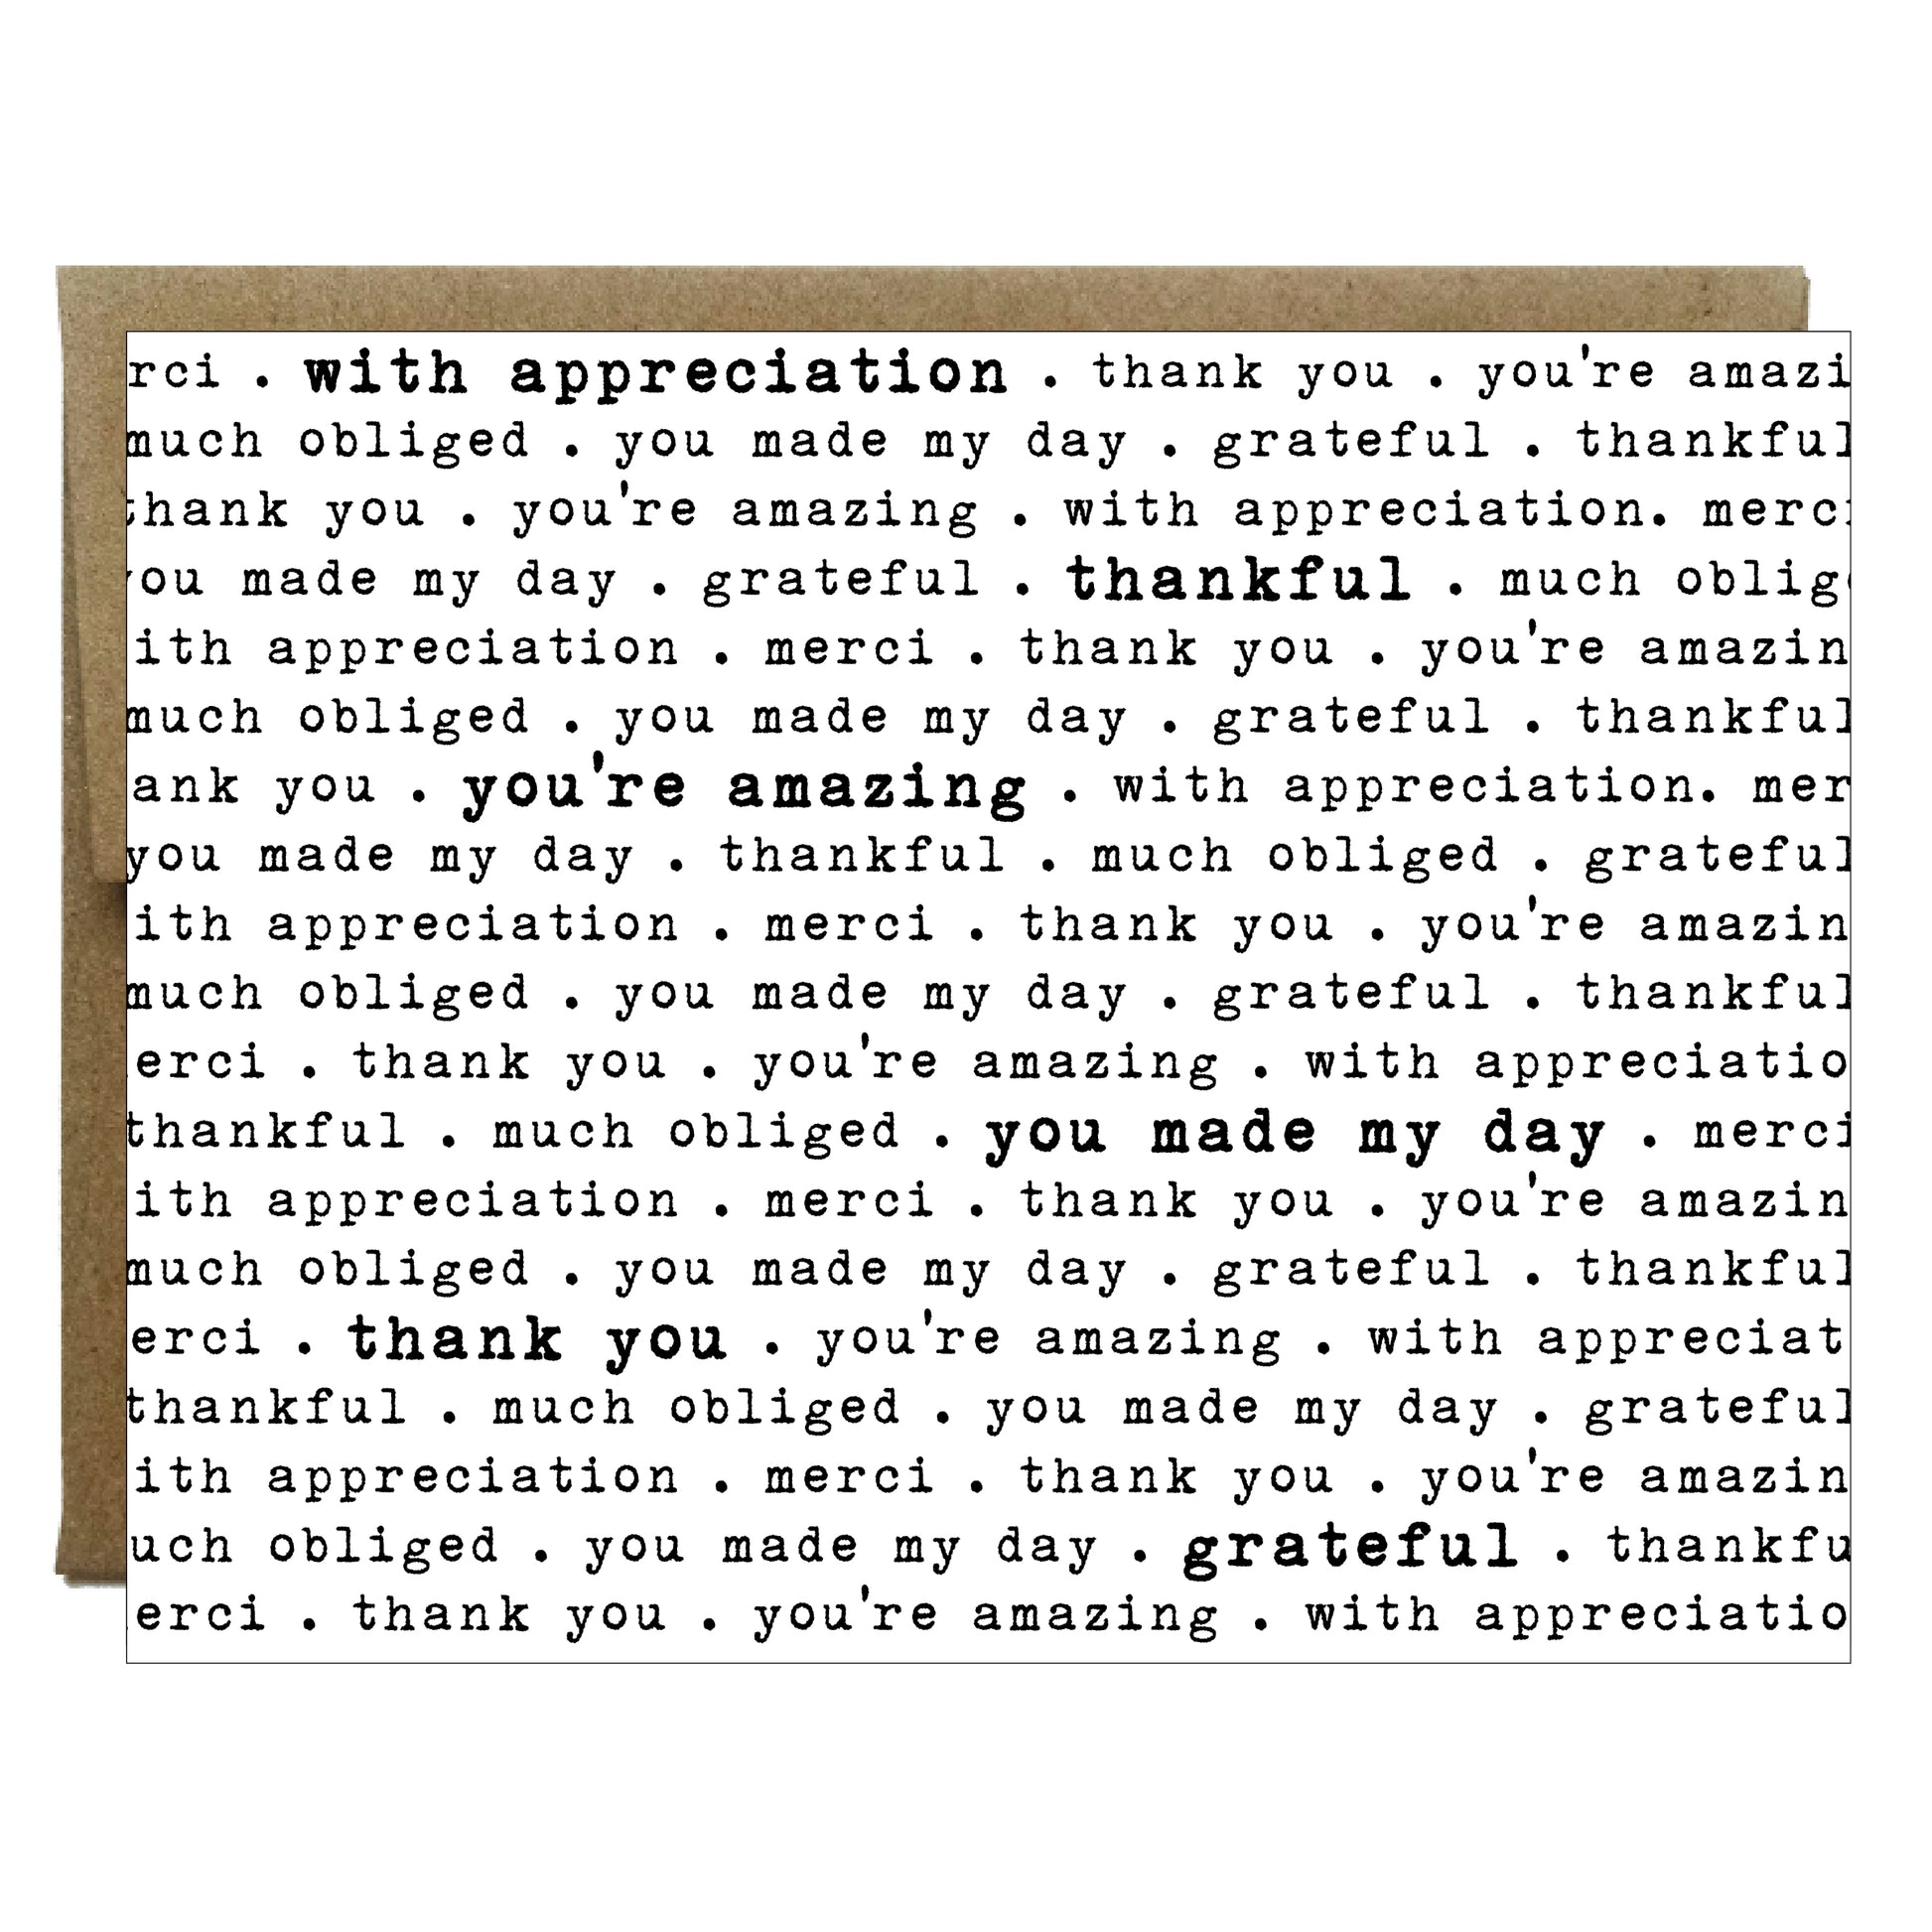 How to Say Thank You in Every Way Card - Idea Chíc